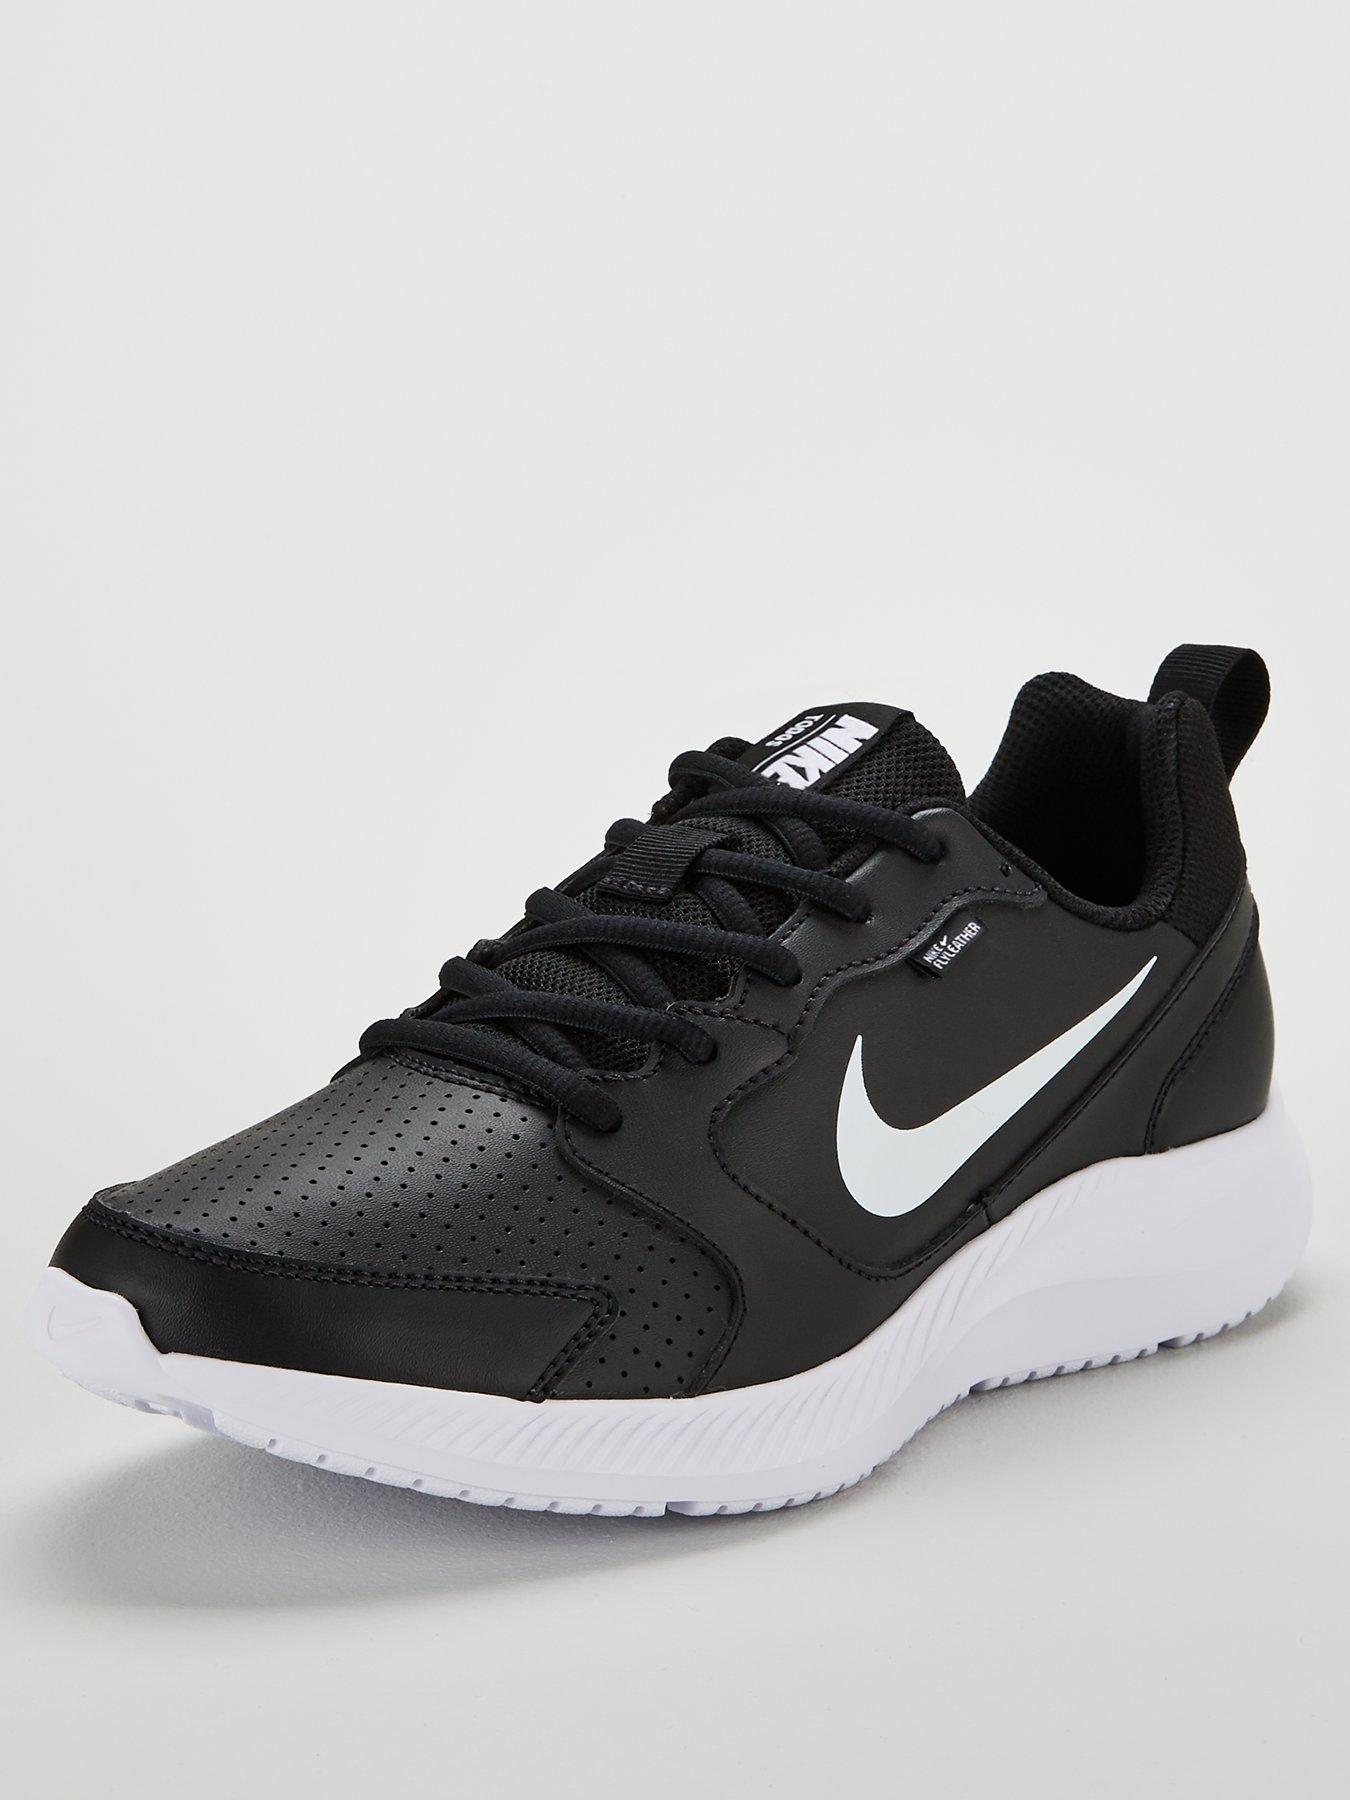 nike black leather trainers womens